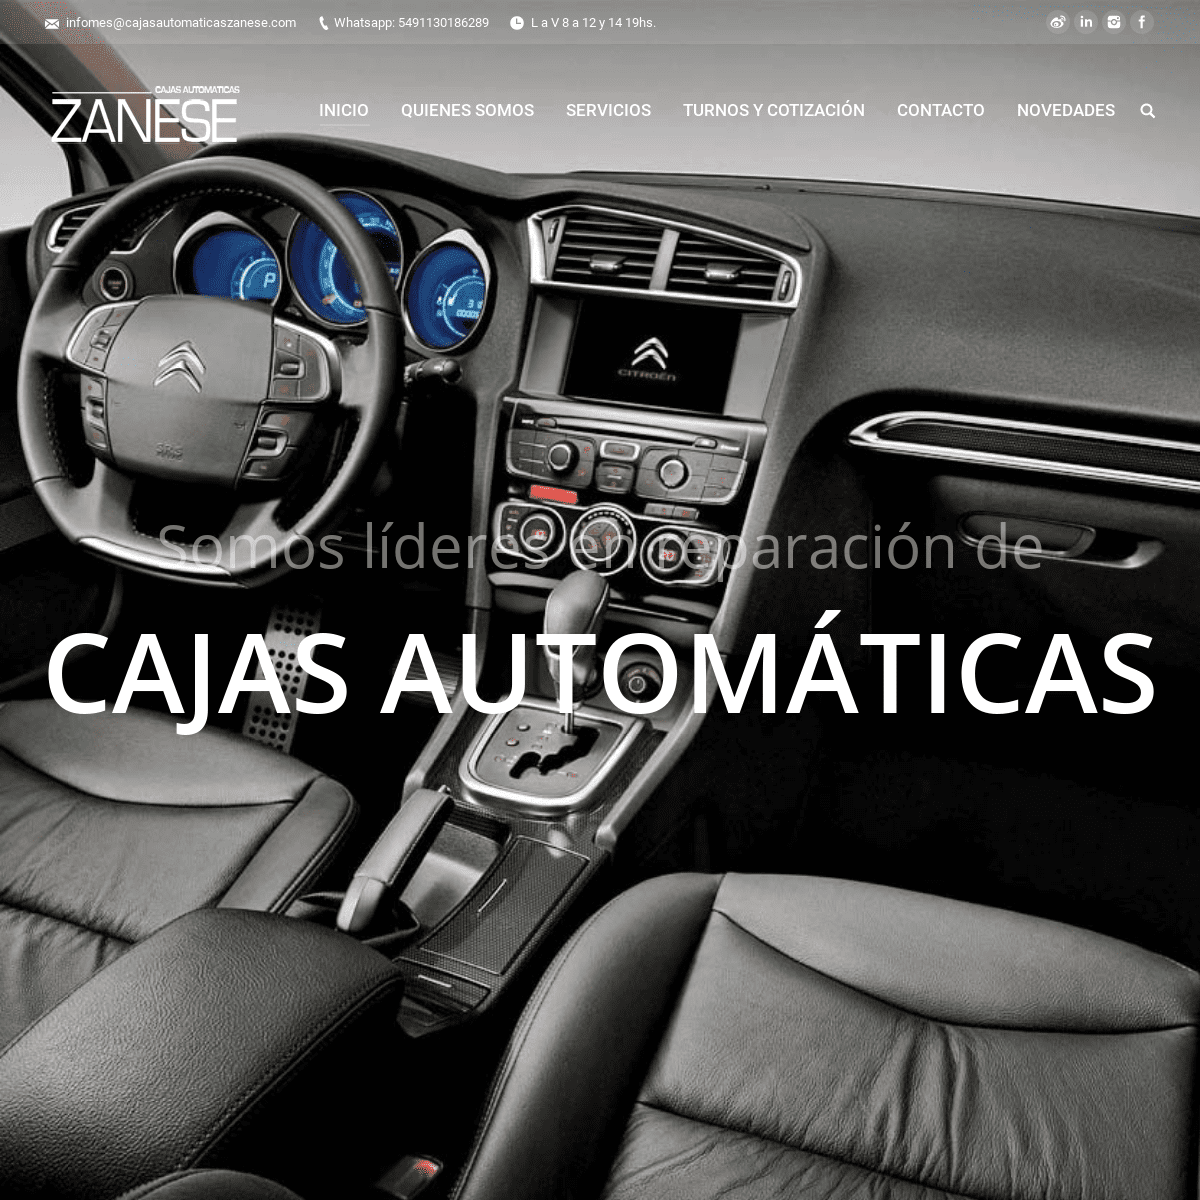 A complete backup of cajasautomaticaszanese.com